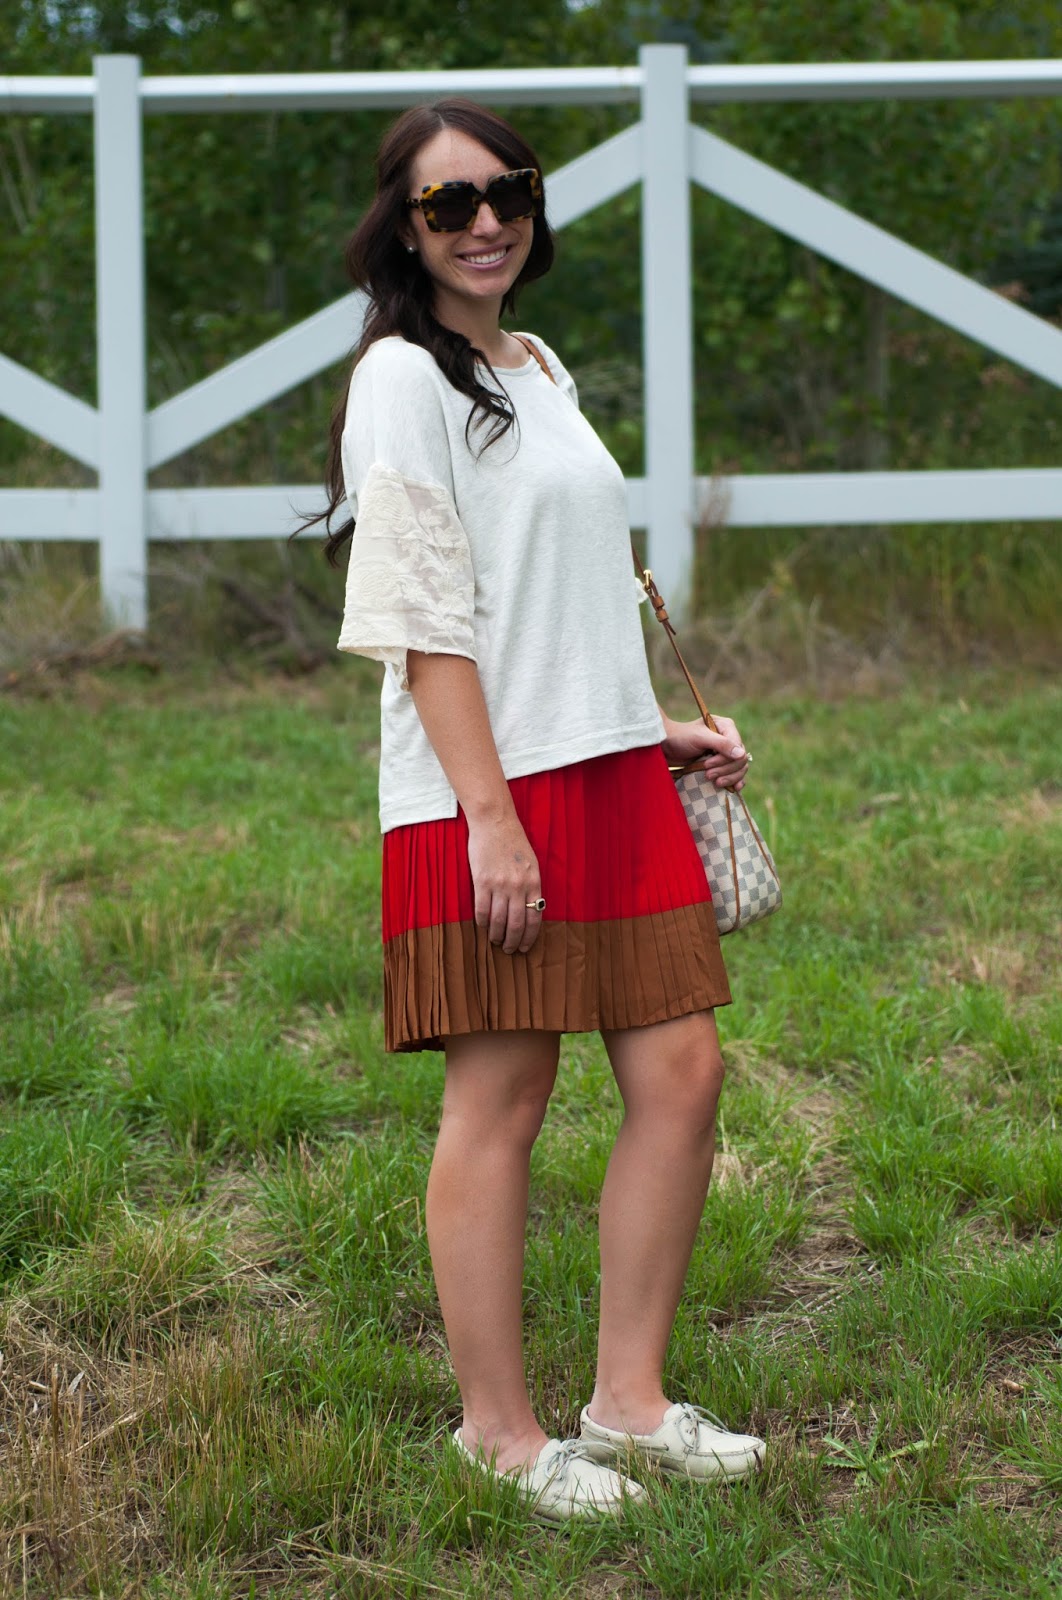 womens fashion blog, ootd blog, anthropologie ootd, sperry topsider, lace top, lands end skirt